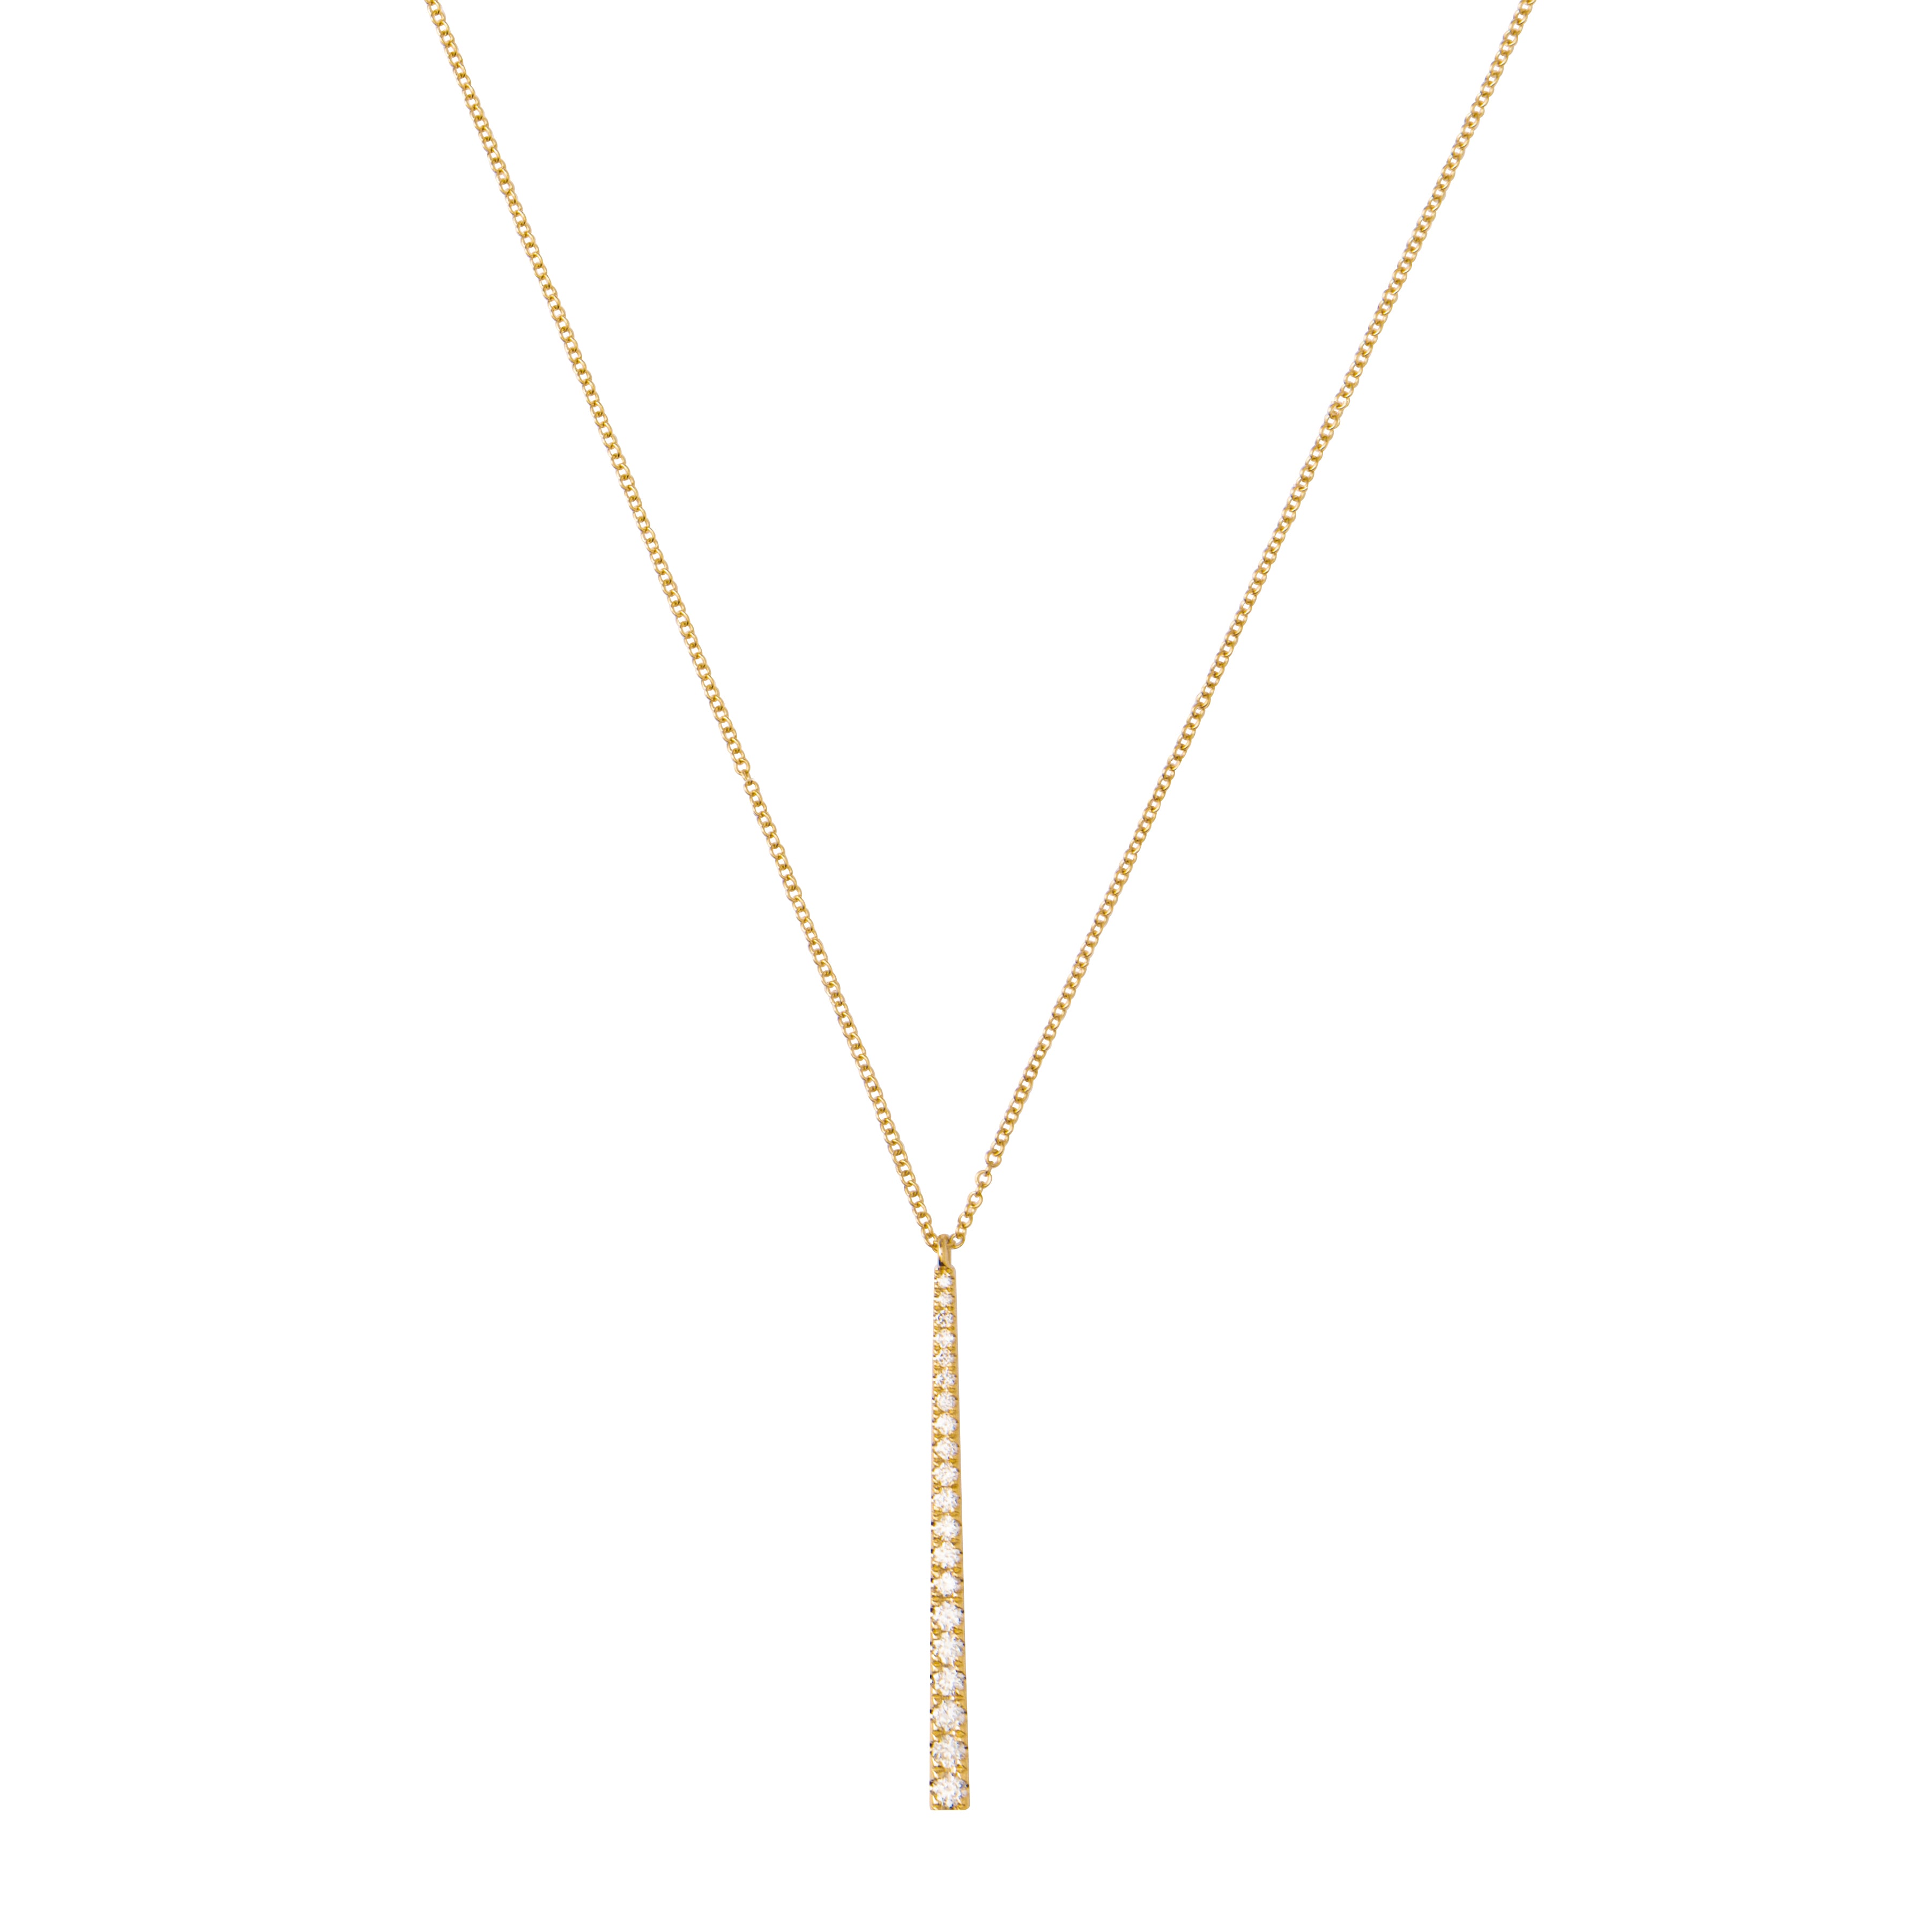 Shop Silver and Gold Bar Necklaces | Helzberg Diamonds